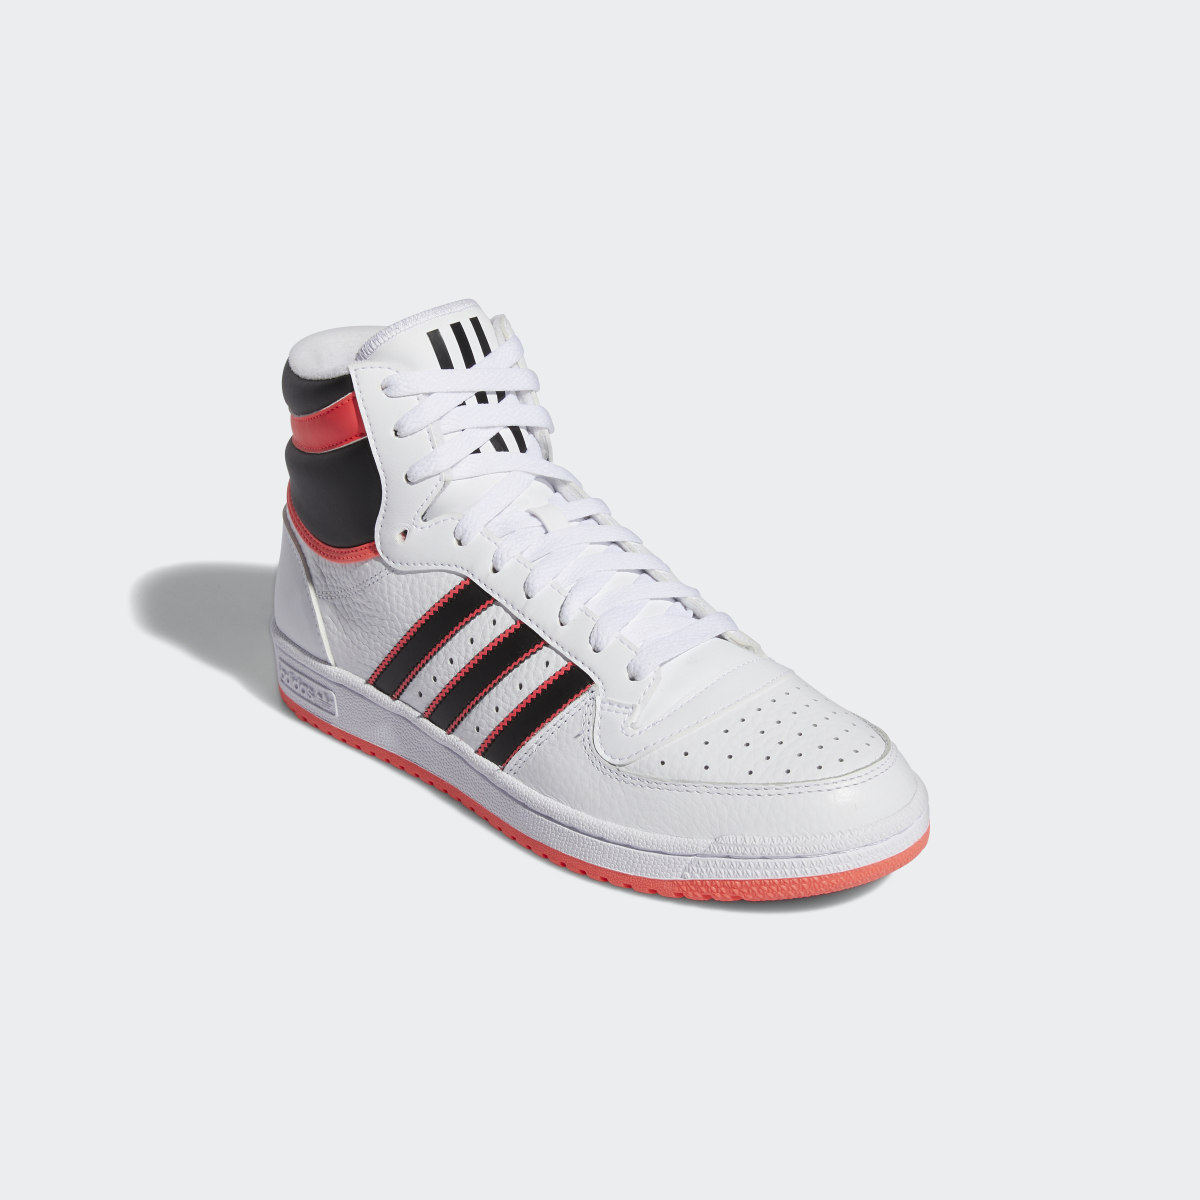 Adidas Top Ten RB Shoes. 5